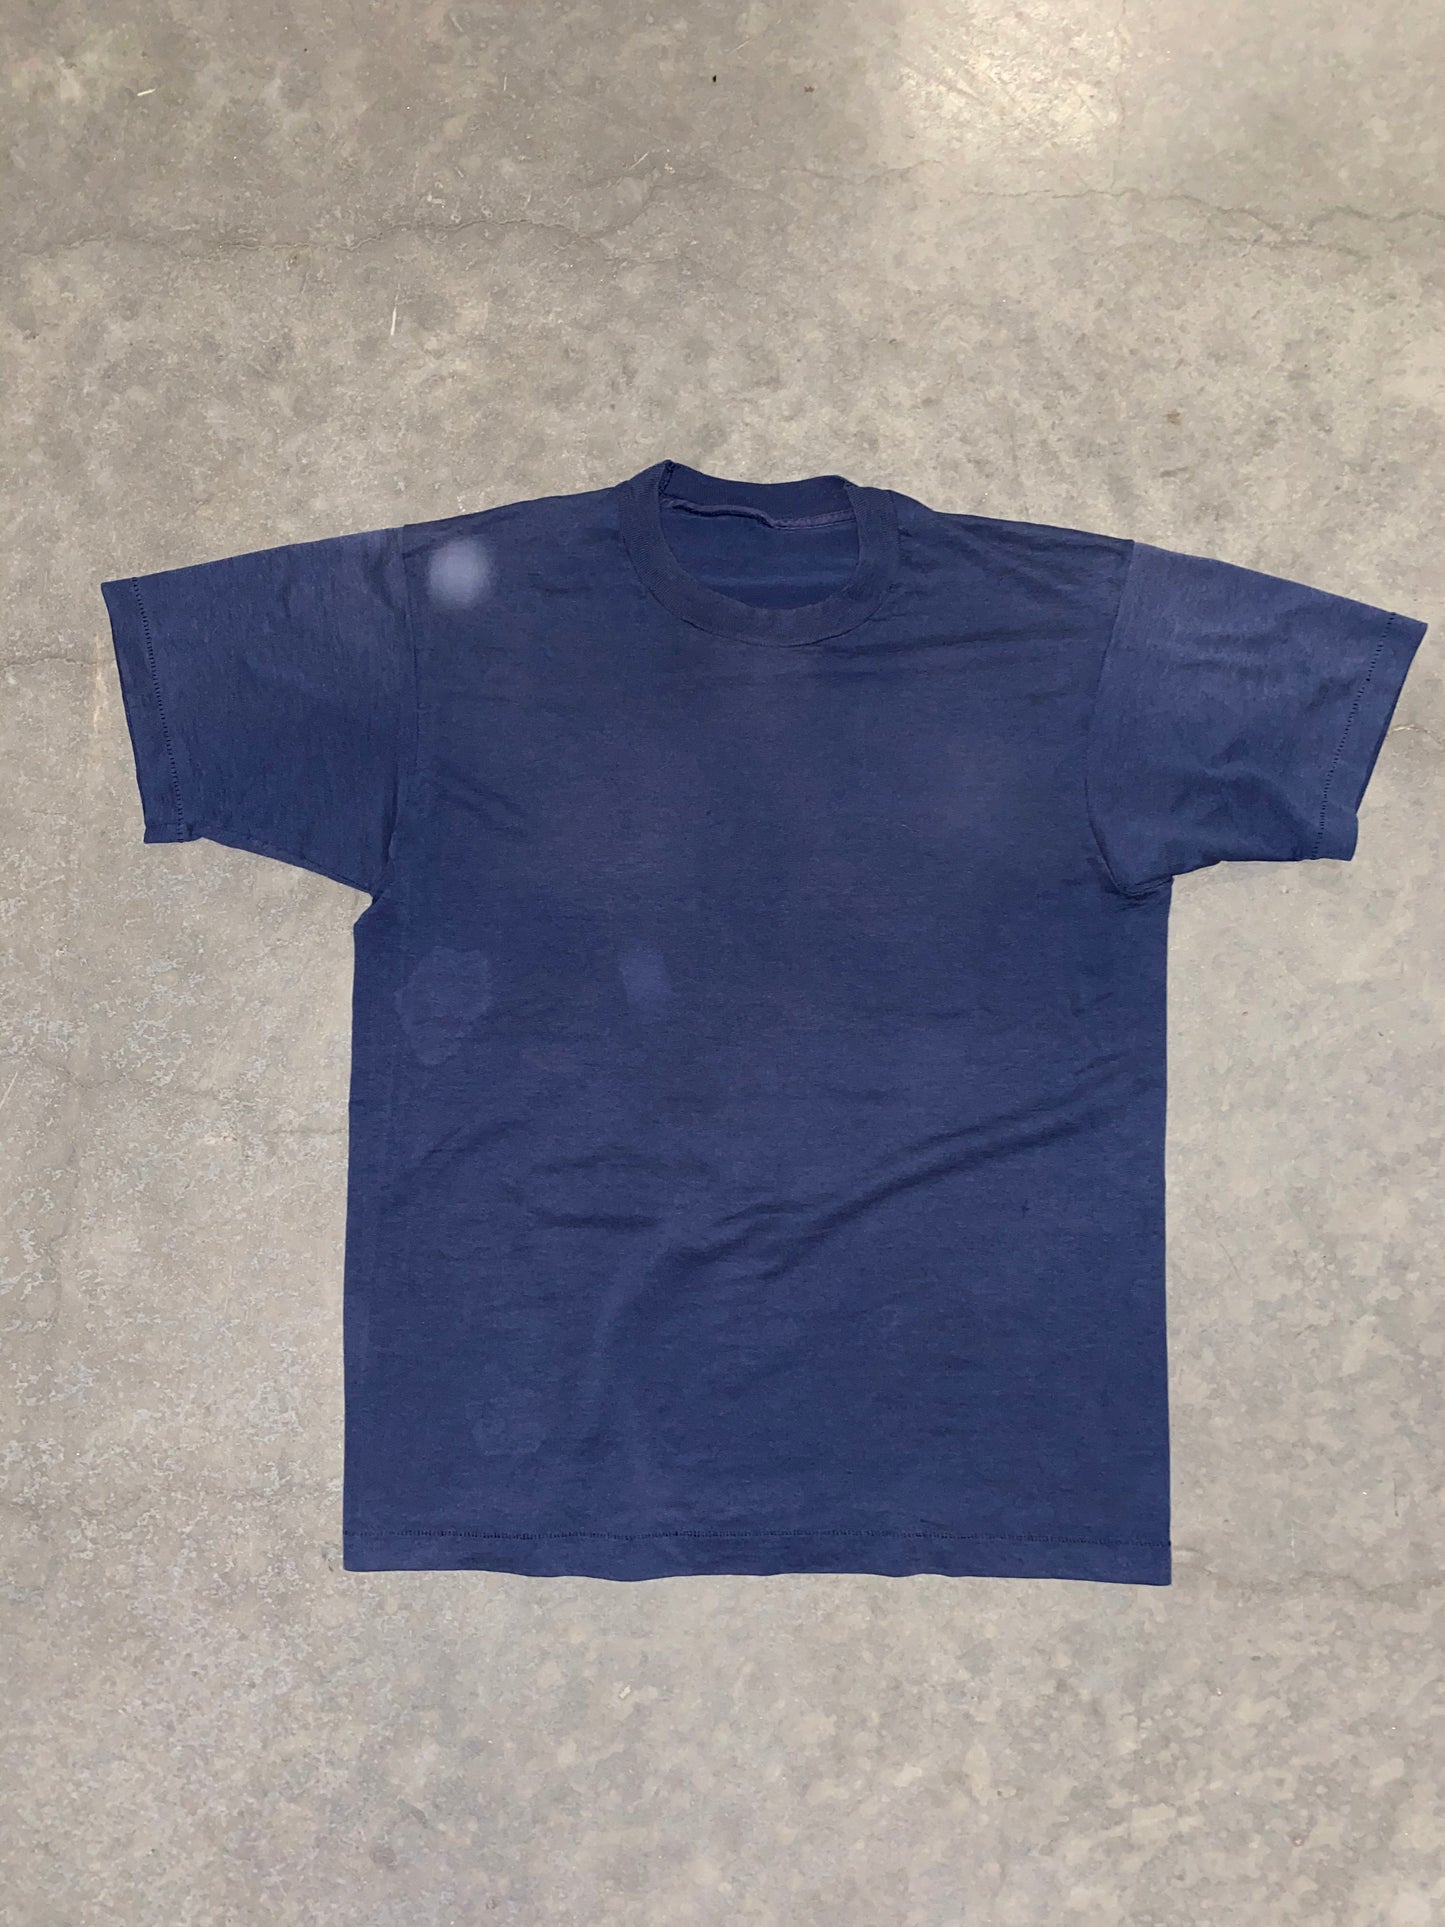 Vintage 90S Faded Navy Tee | L